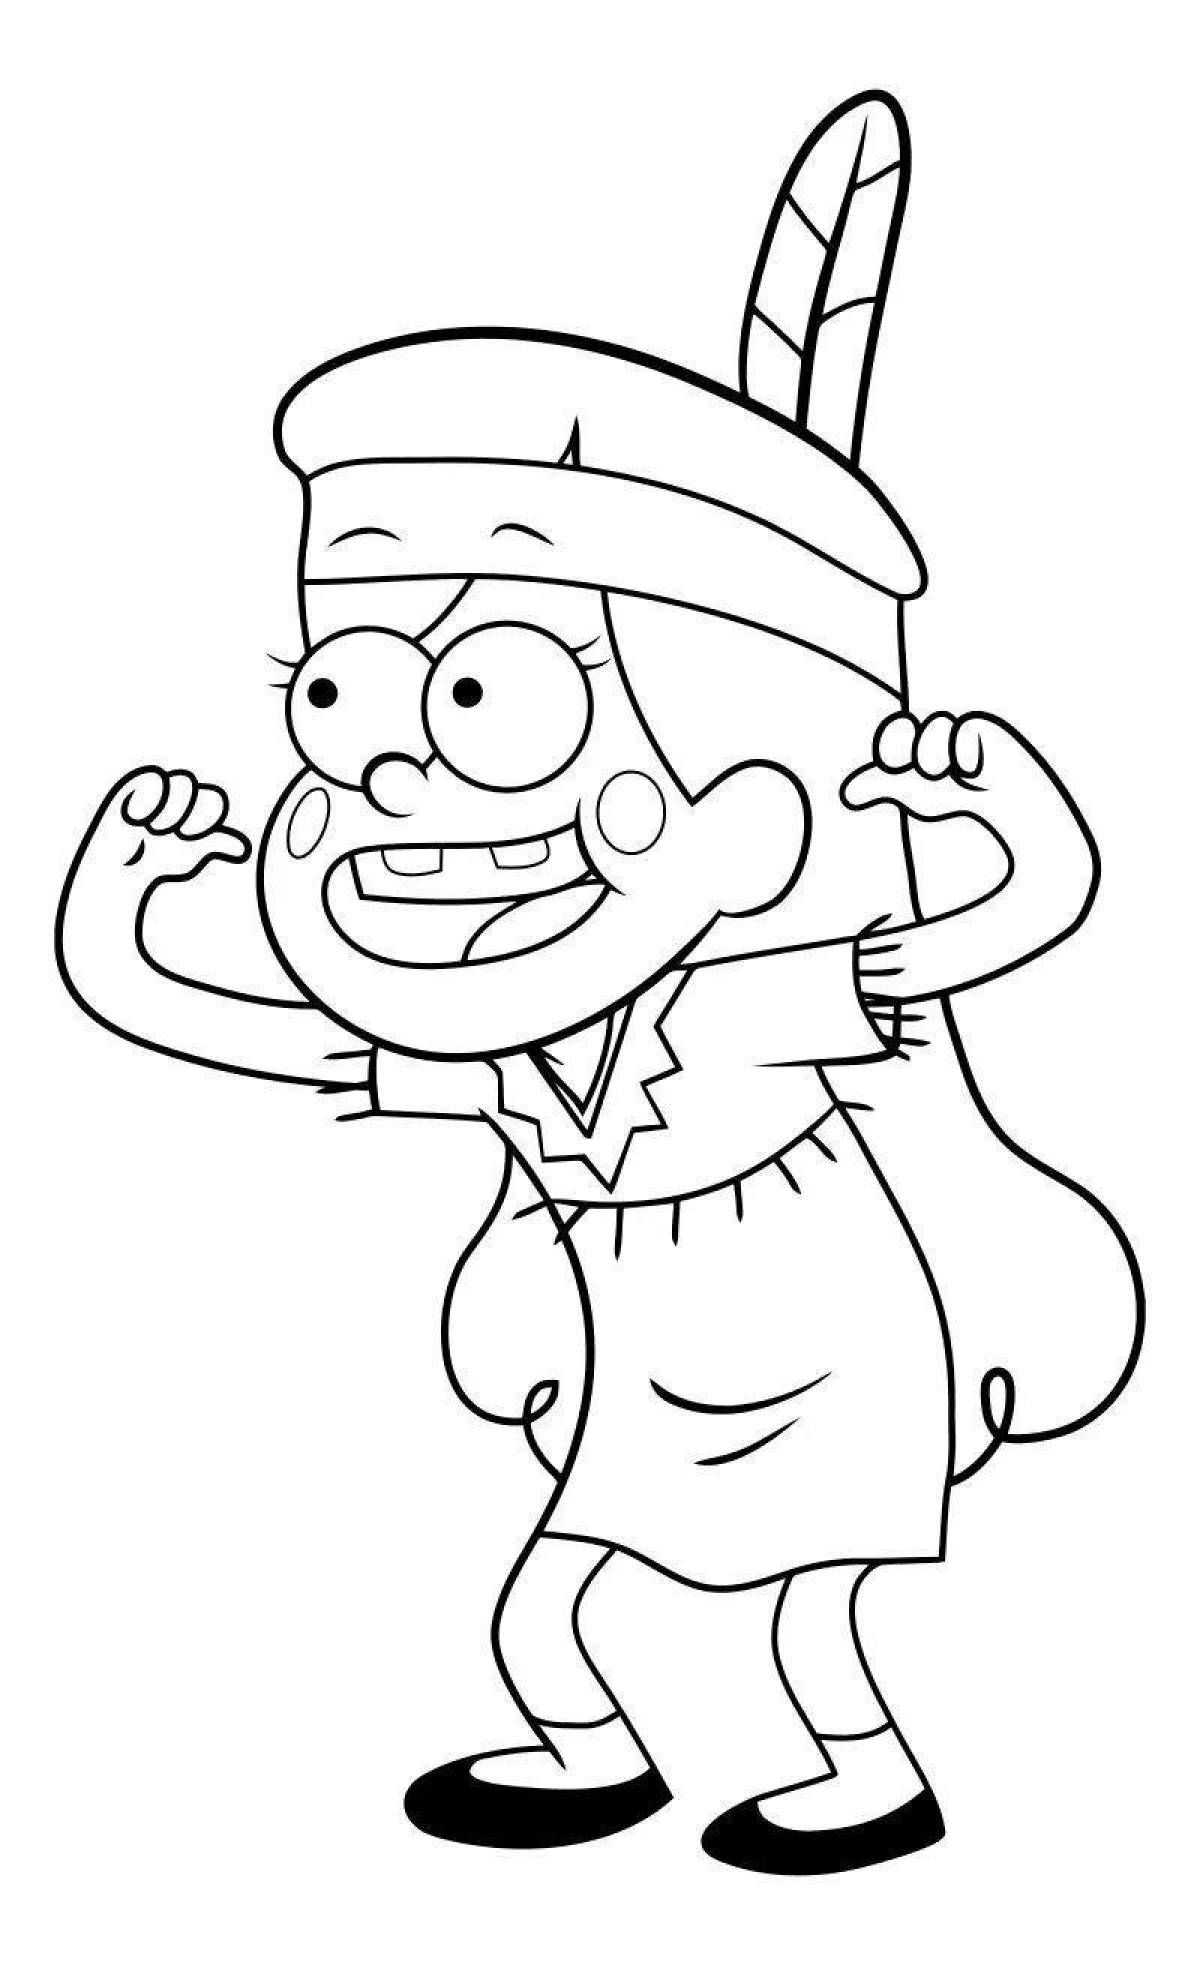 Playful gravity falls coloring page